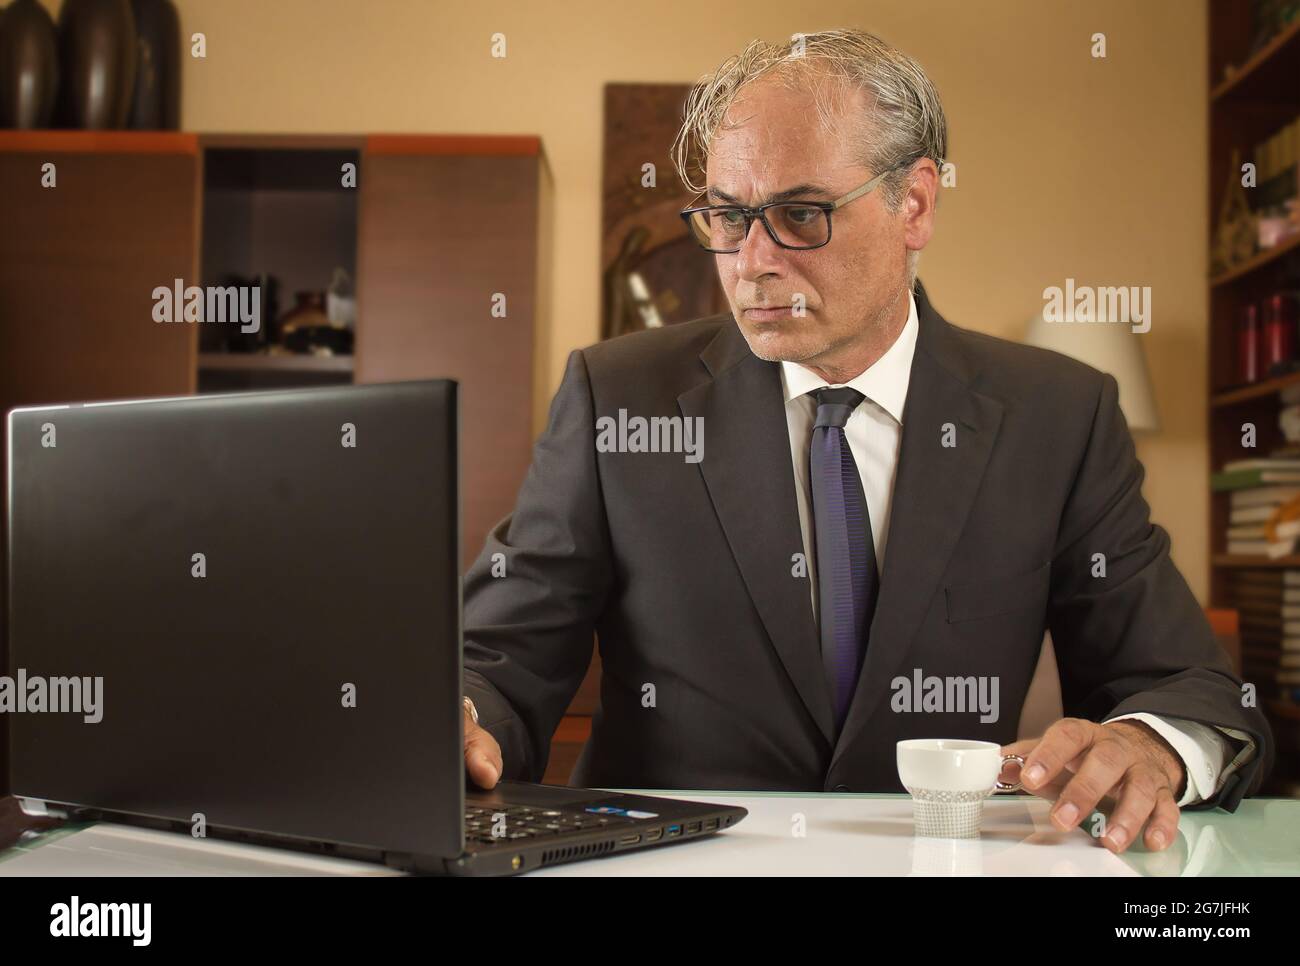 businessman having coffee and teleworking from home with laptop due to covid restrictions Stock Photo